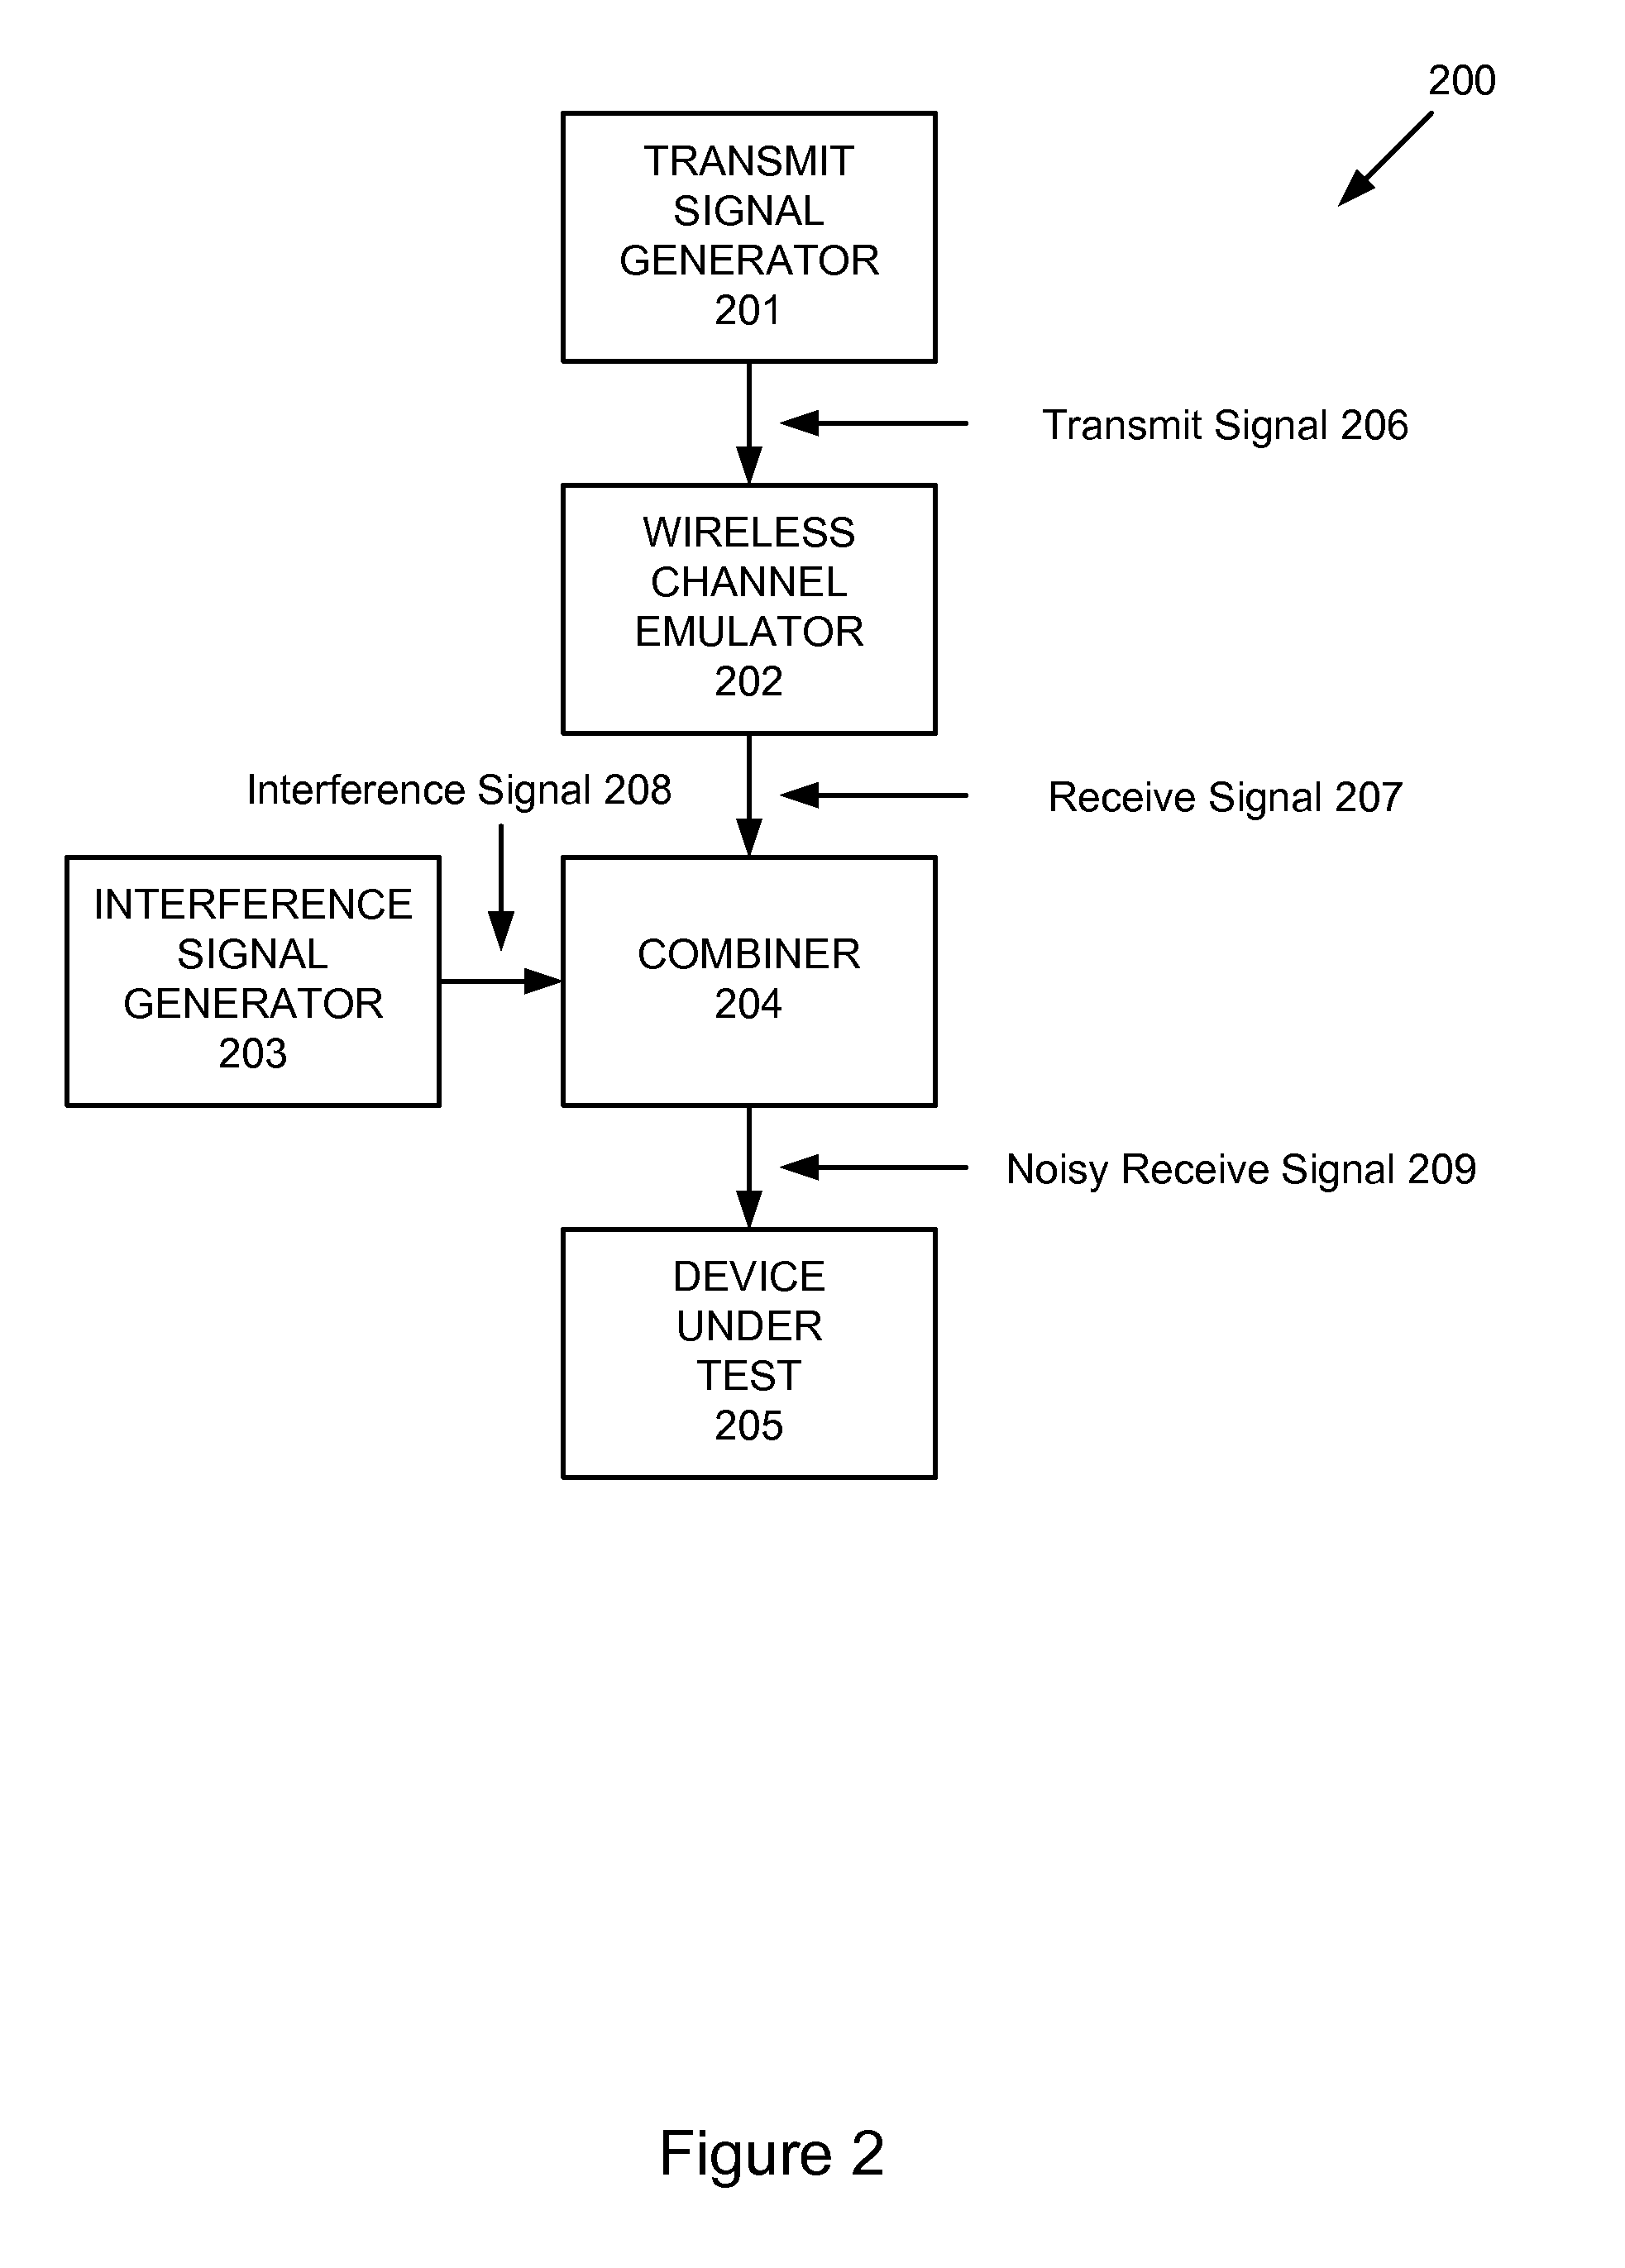 Method and apparatus to generate wireless test signals